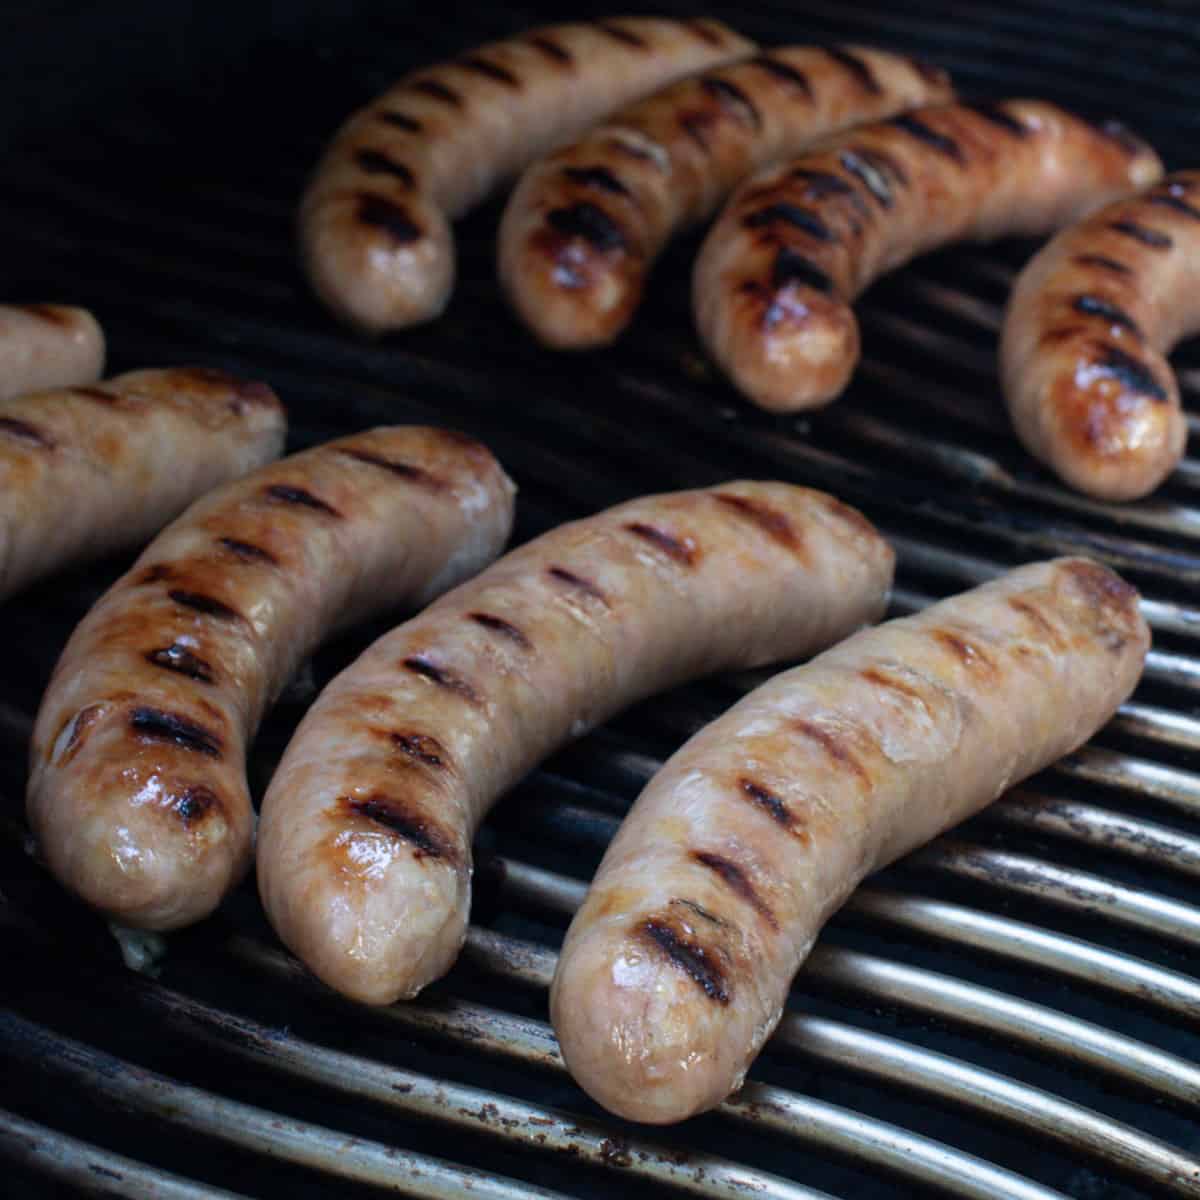 How to Grill Sausage: 13 Steps (with Pictures) - wikiHow Life